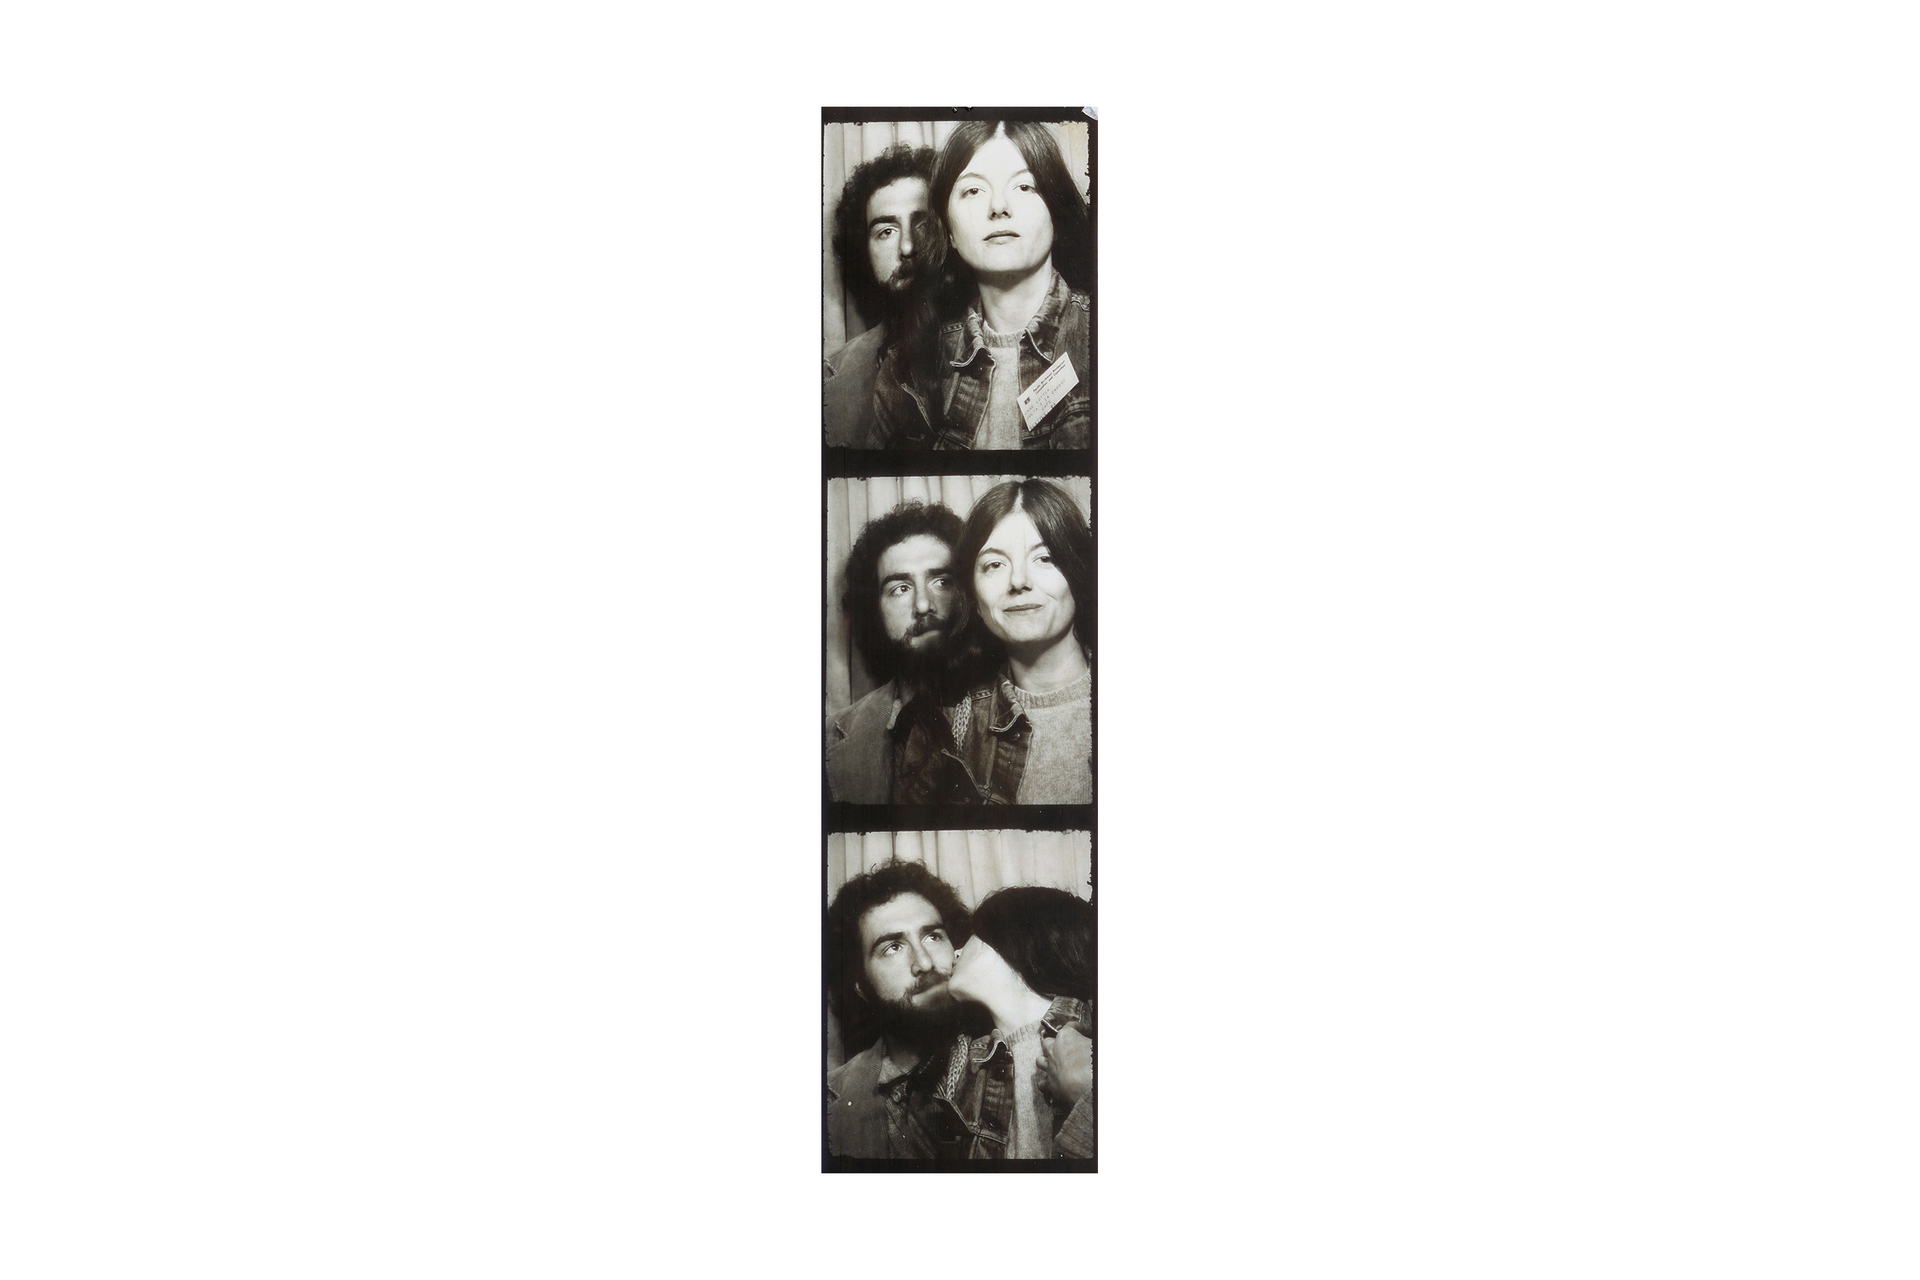 Strip of photo booth images from decades past, with a man and woman, shot in black and white.